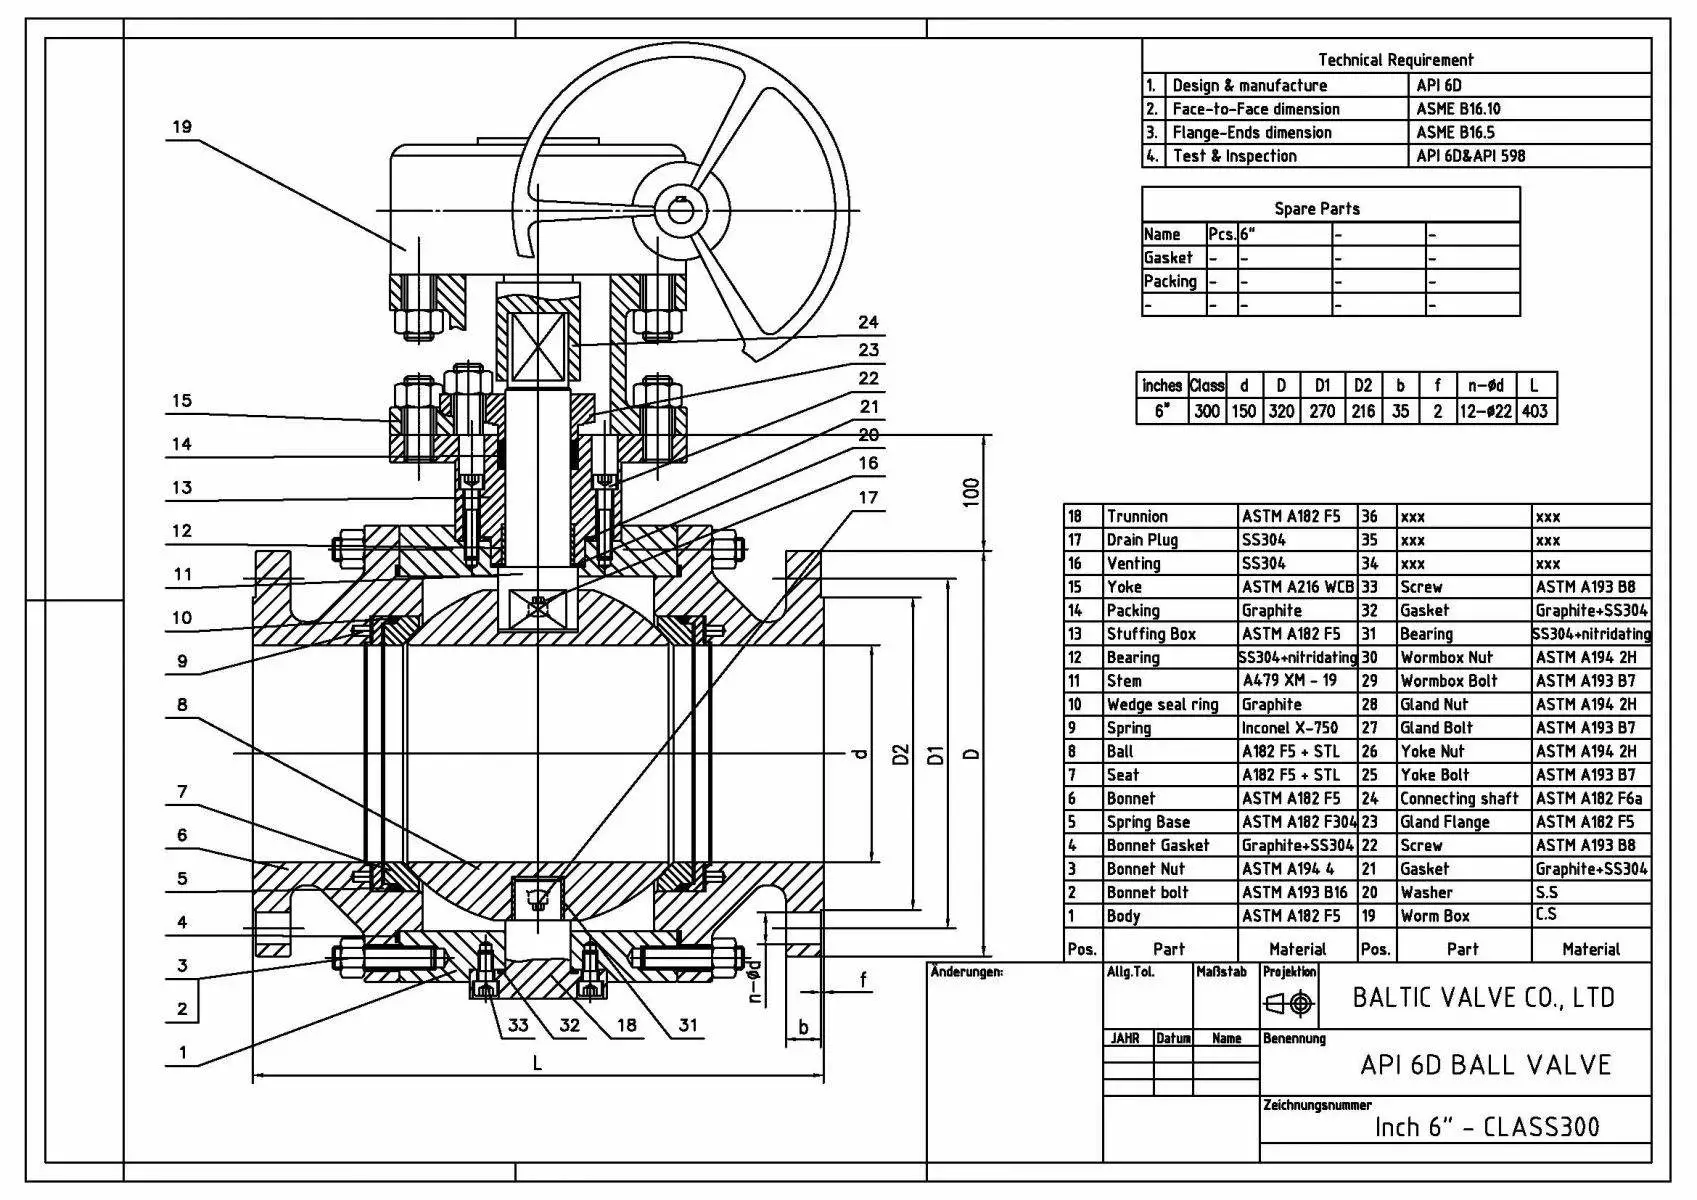 The Ball Valve Drawing